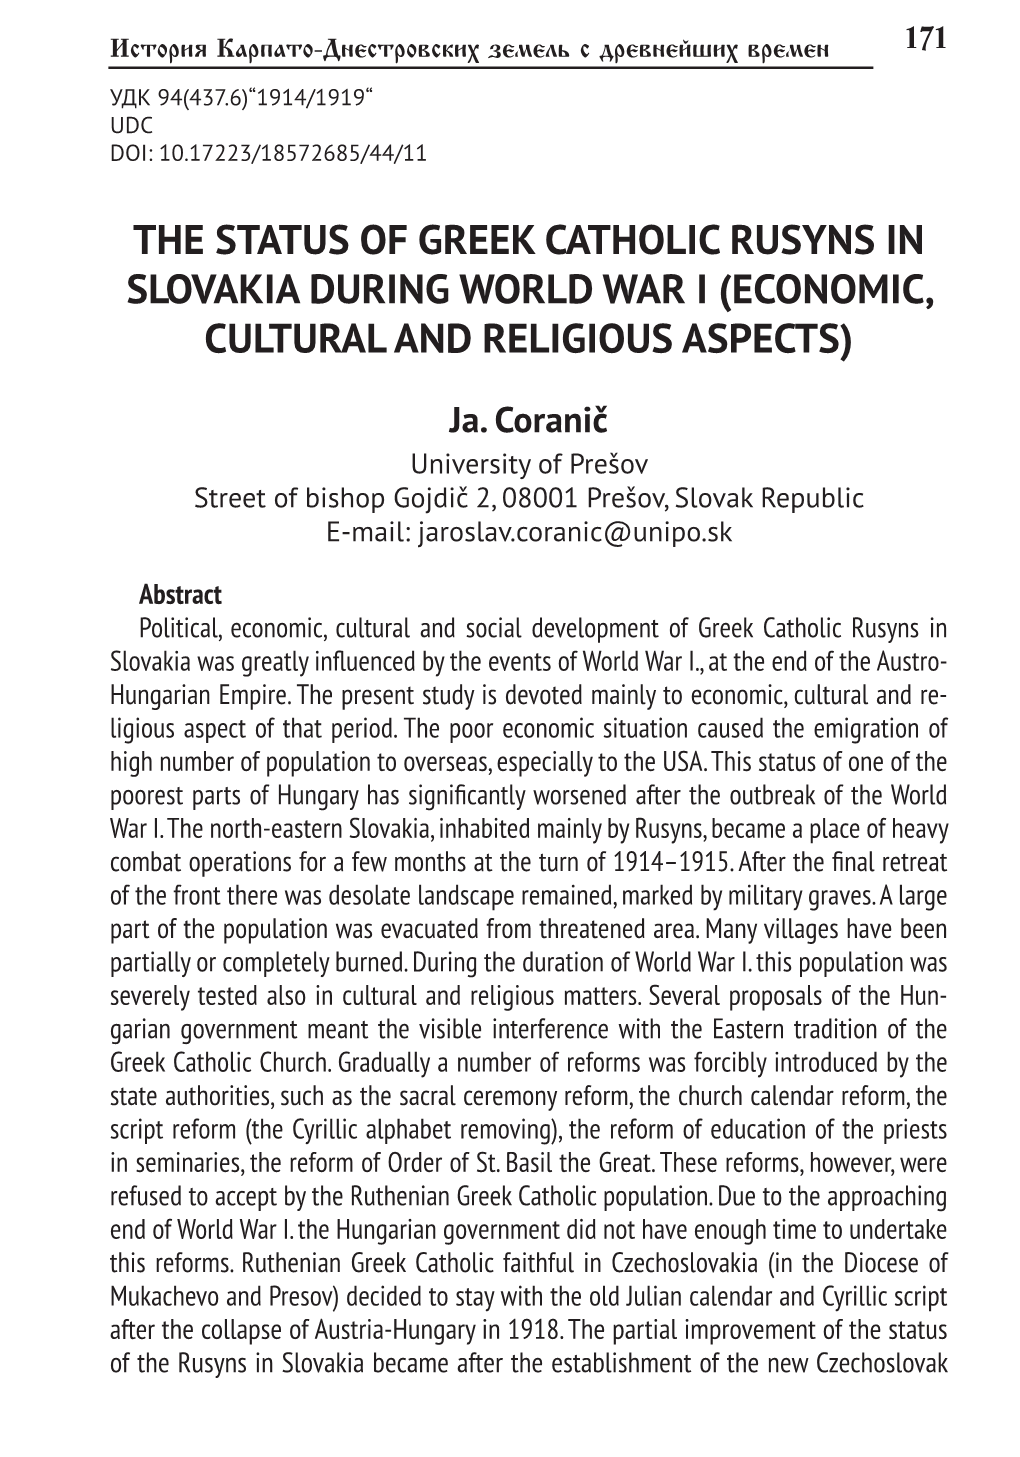 The Status of Greek Catholic Rusyns in Slovakia During World War I (Economic, Cultural and Religious Aspects)